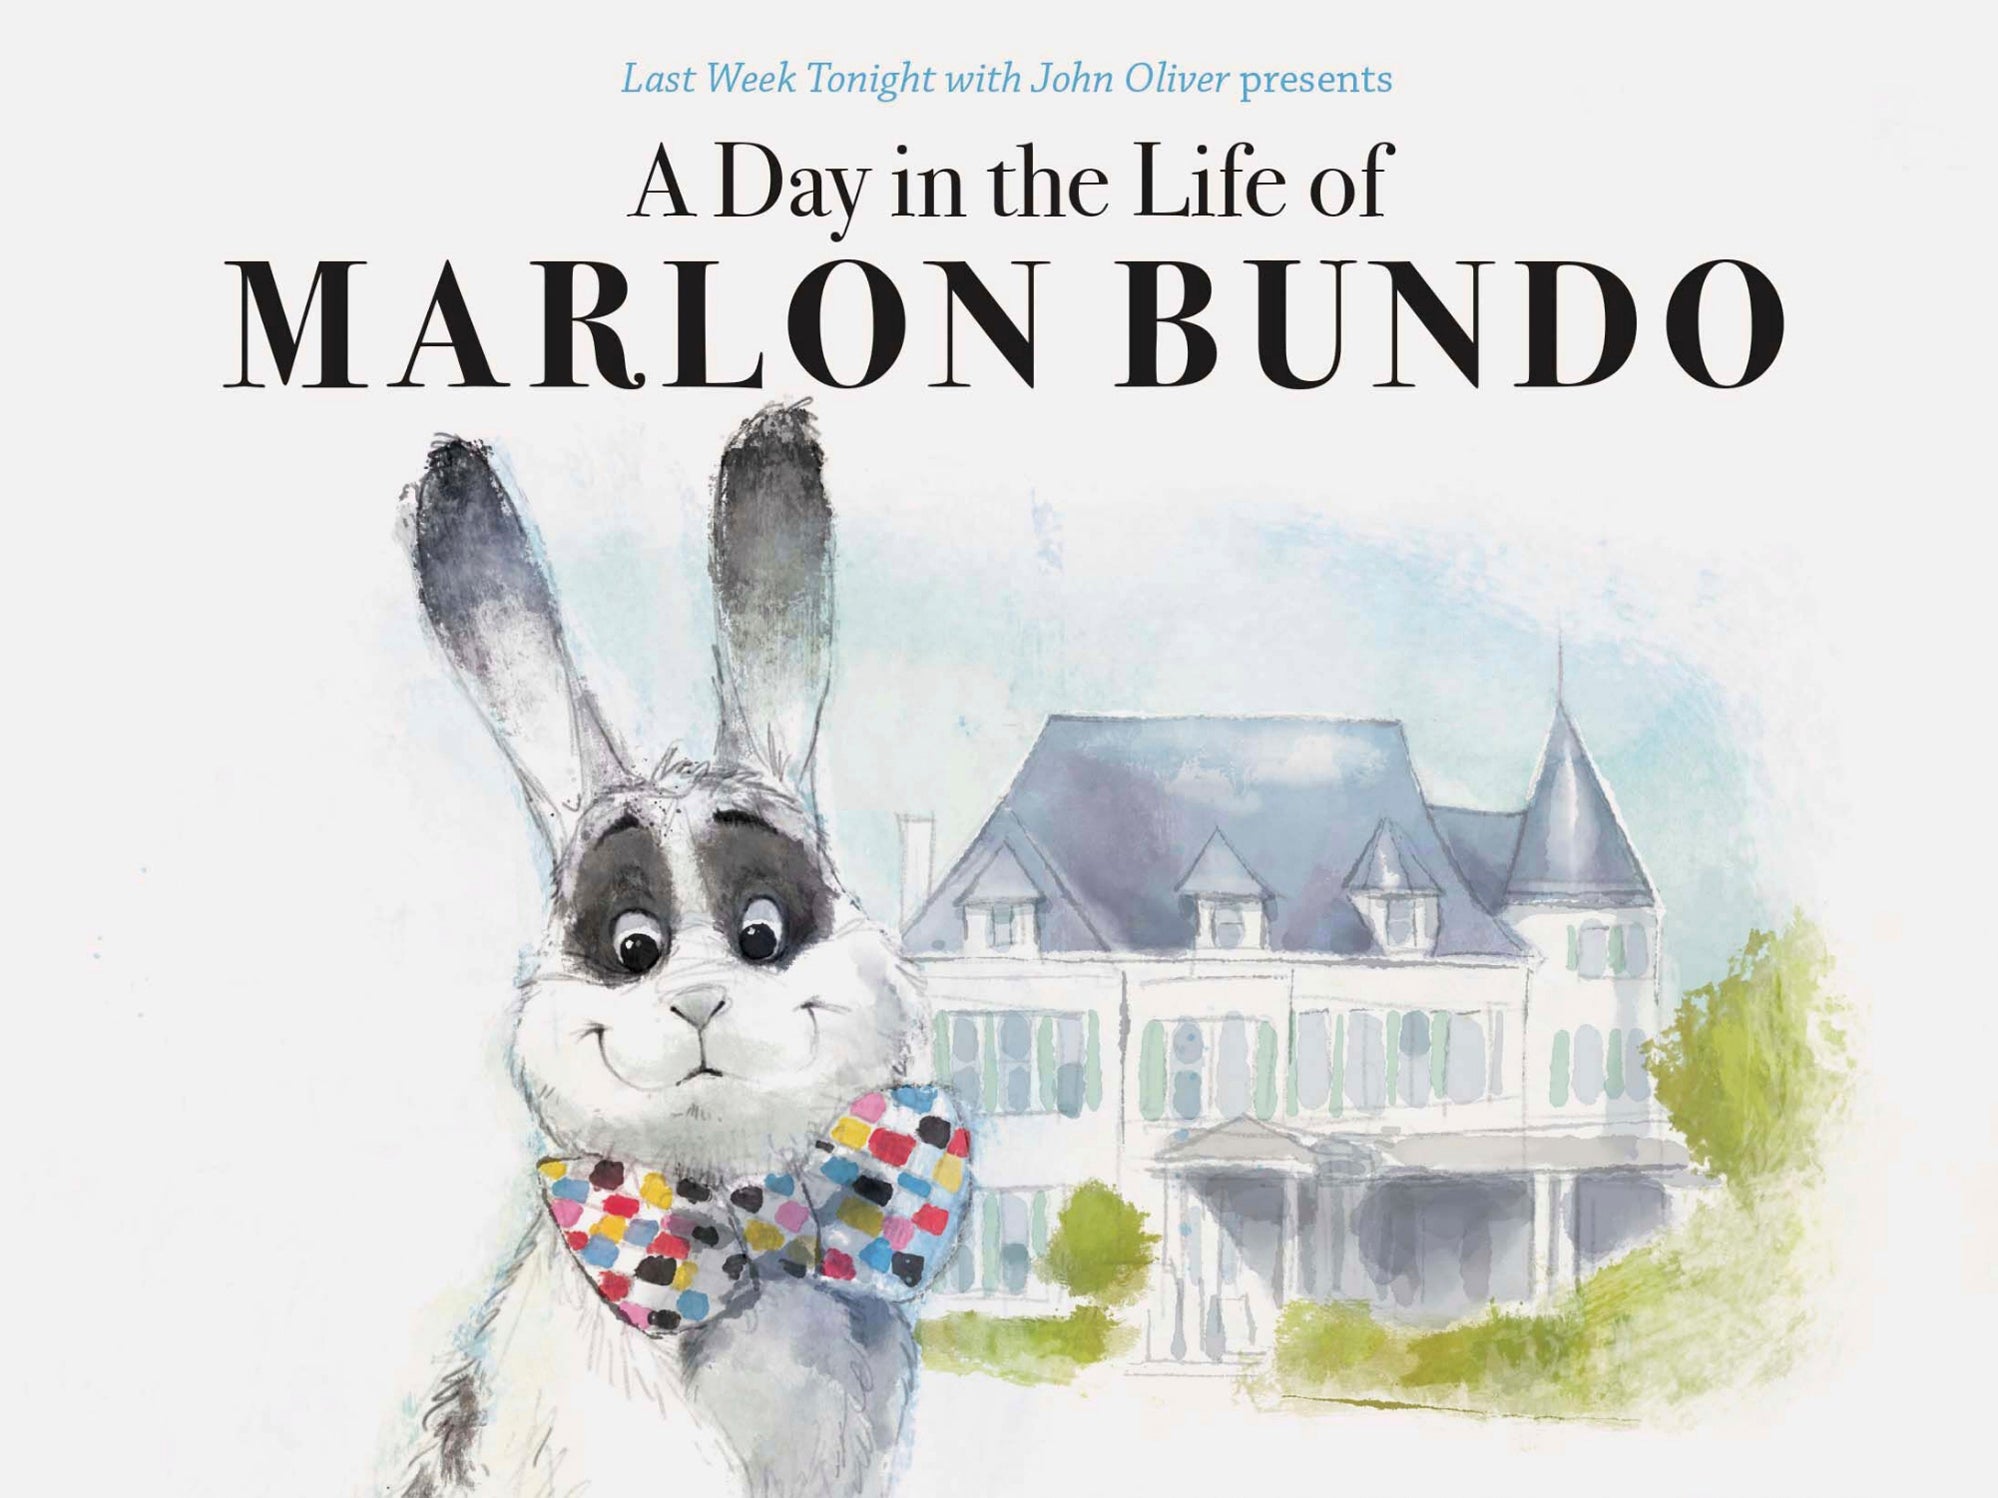 Last Week Tonight with John Oliver Presents a Day in the Life of Marlon Bundo was third on the list